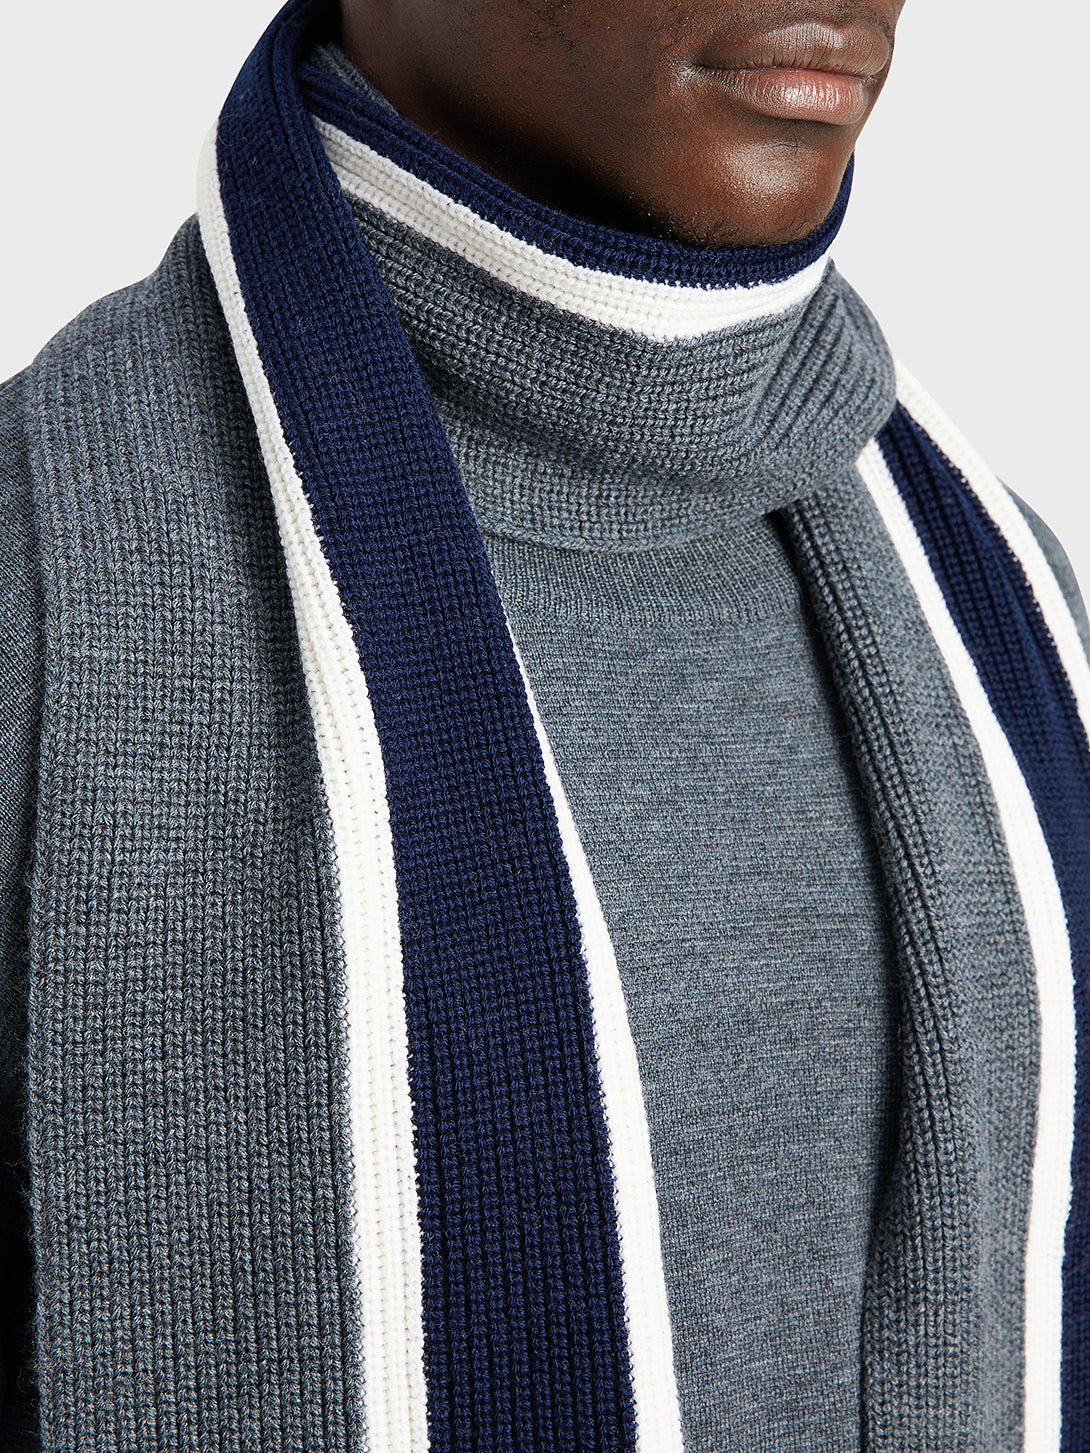 ONS Clothing Men's scarf in CHARCOAL H STRIPE black friday deals